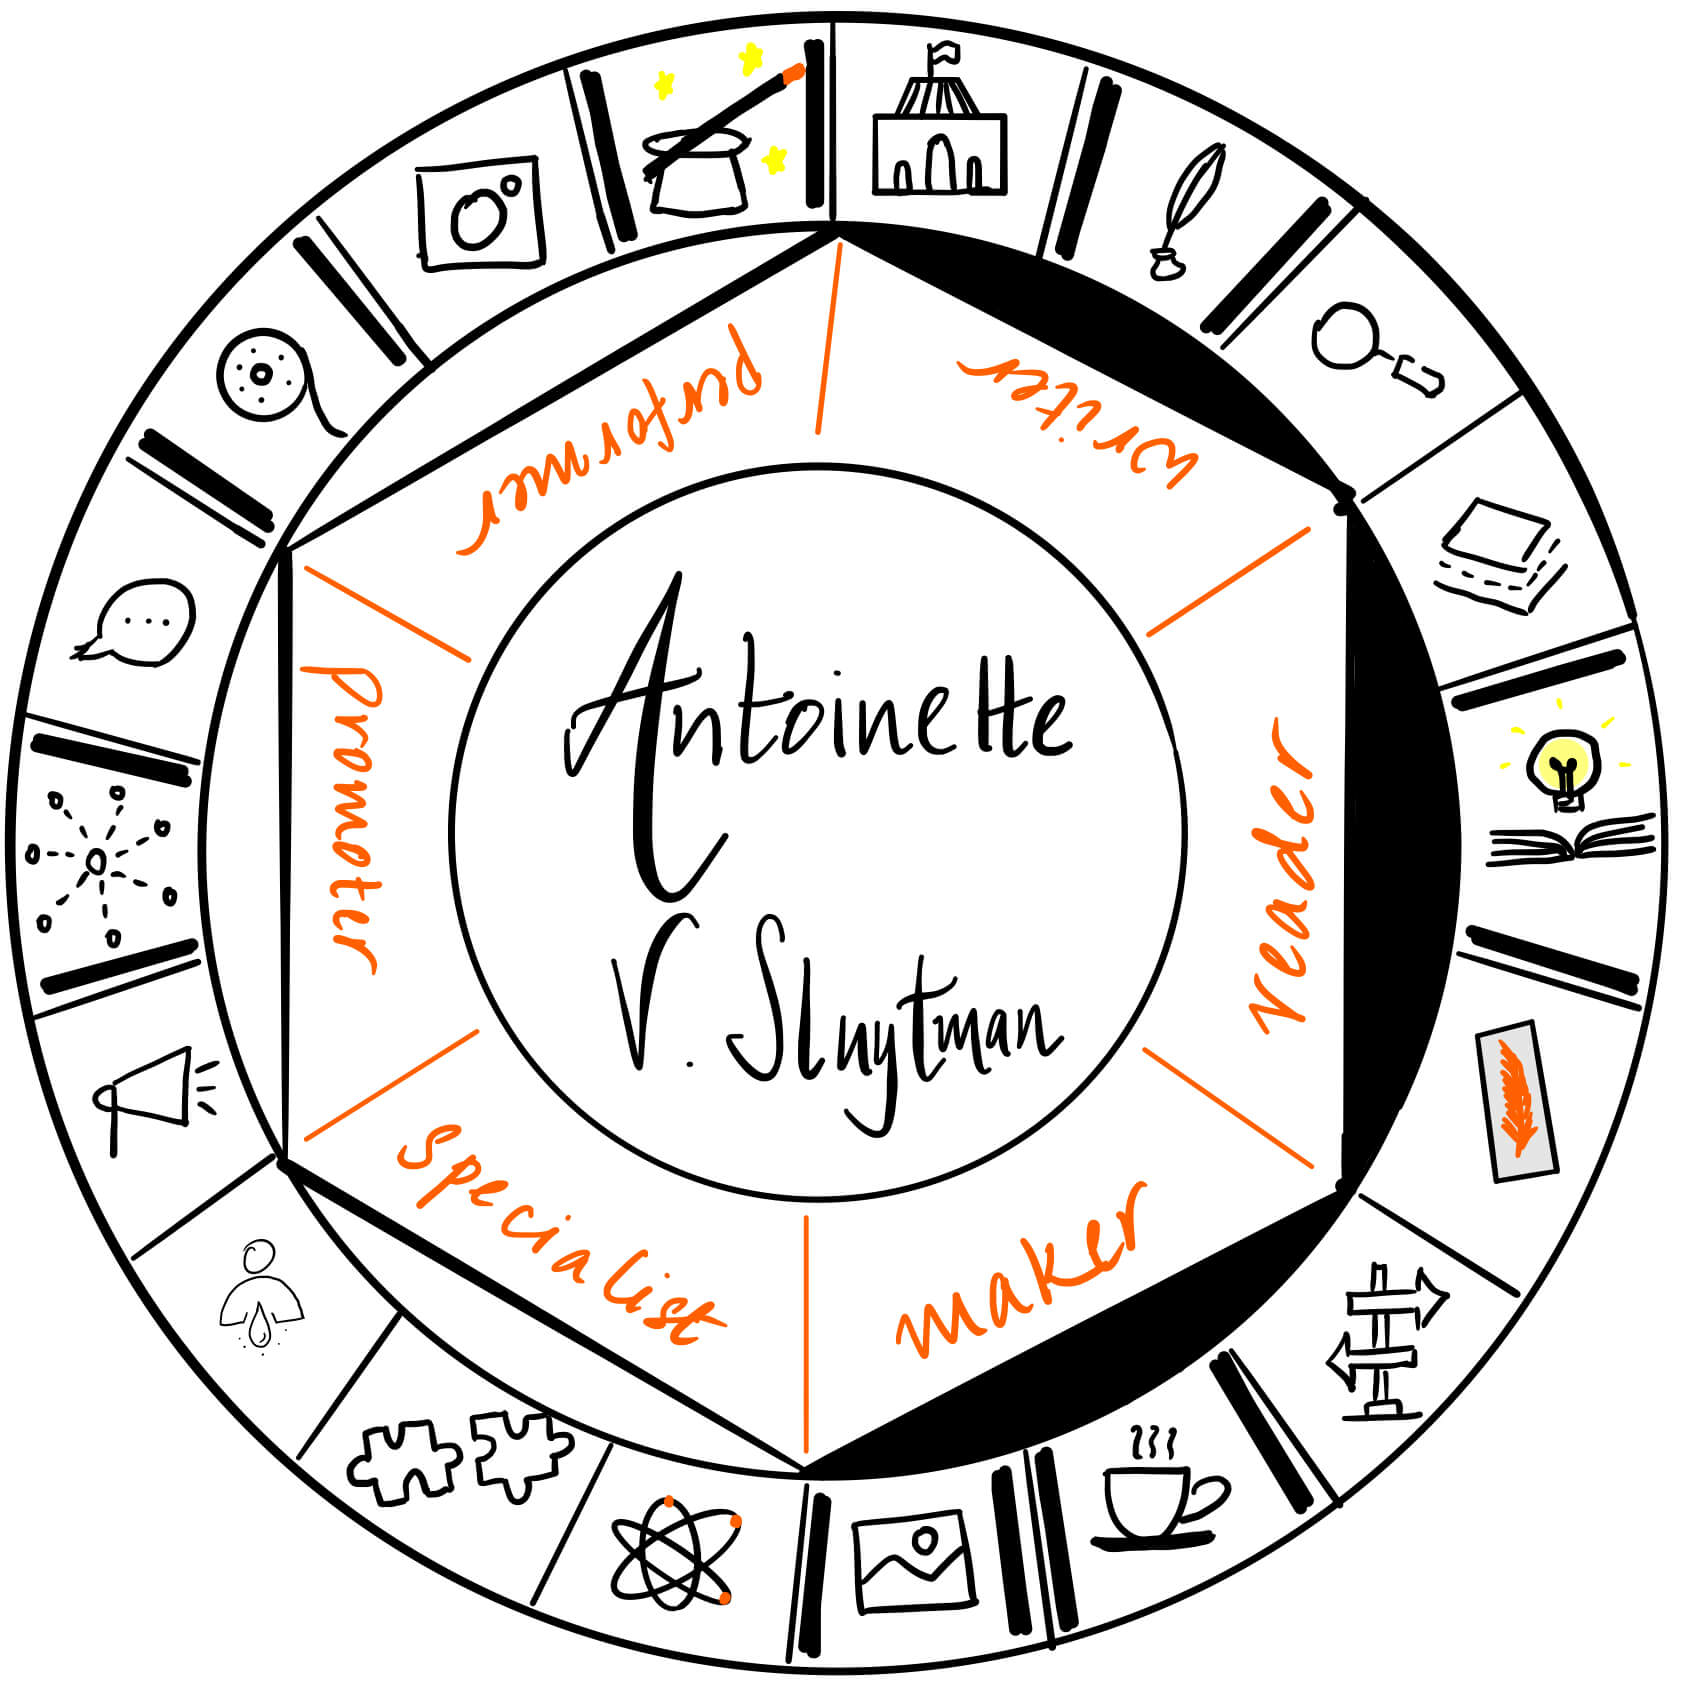 Antoinette is a writer, reader and maker. It's a pleasure to have her over on The Creator's Roulette to share about the power of writing.